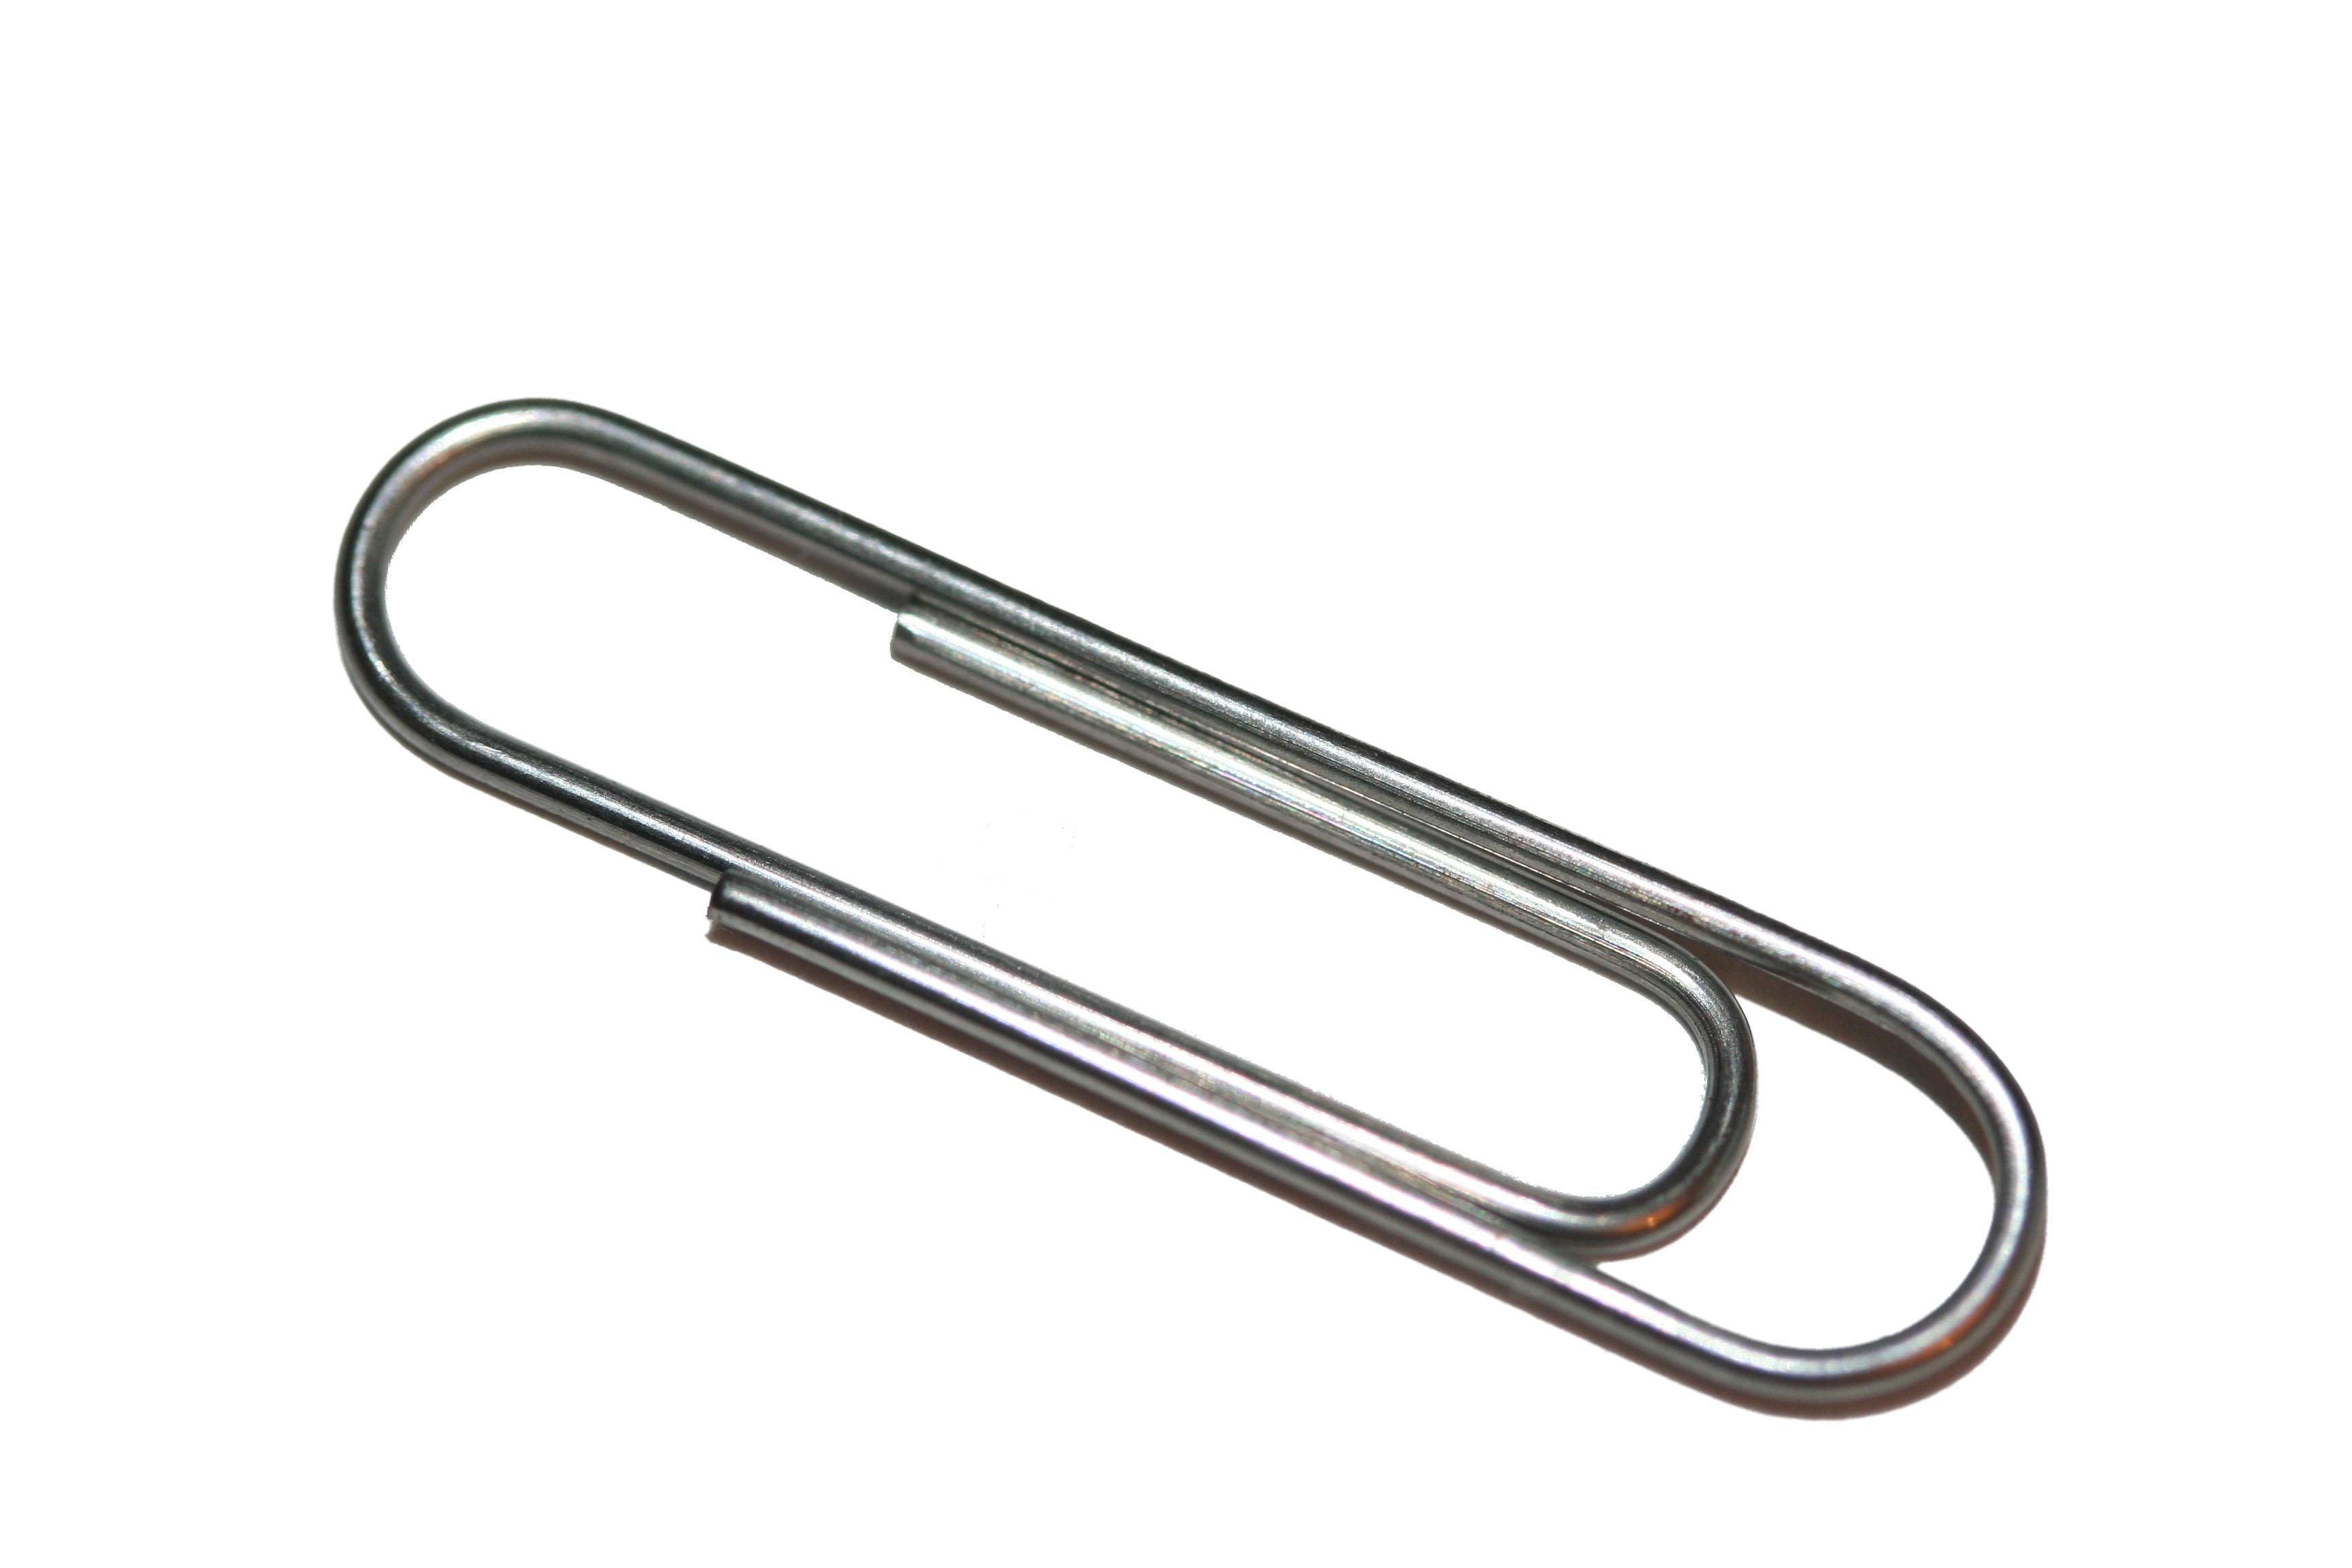 paperclip clipart single object